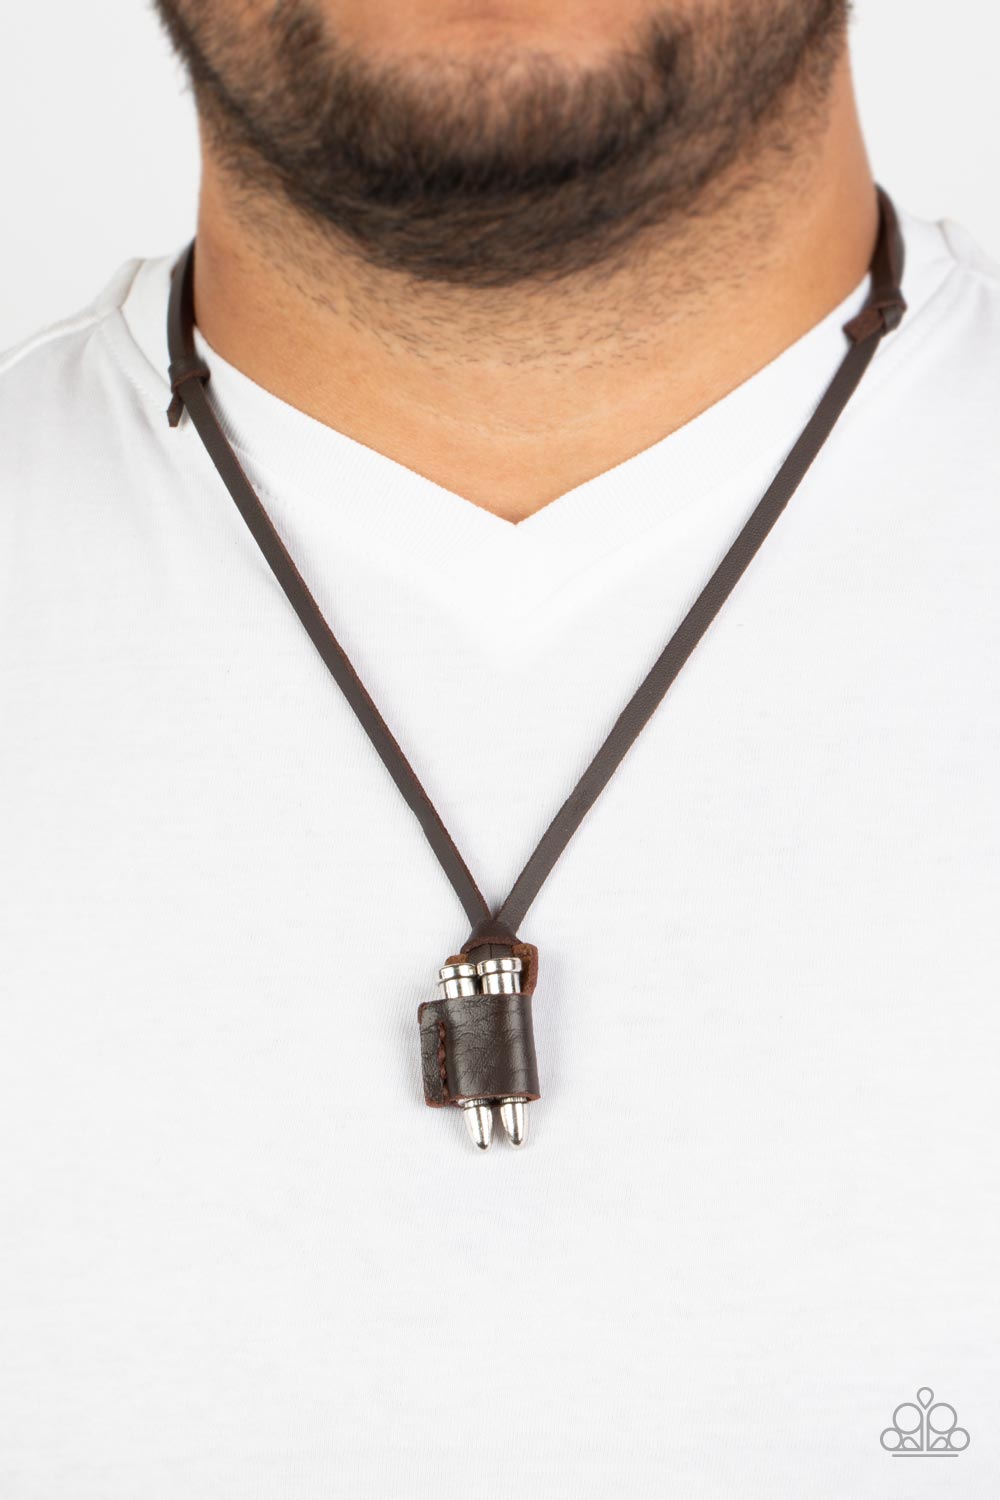 On the Lookout Brown Unisex Necklace - Paparazzi Accessories  A piece of brown leather wraps around a pair of silver bullets, creating an edgy urban pendant at the bottom of knotted strands of brown leather. Features an adjustable sliding knot closure.  Sold as one individual necklace.